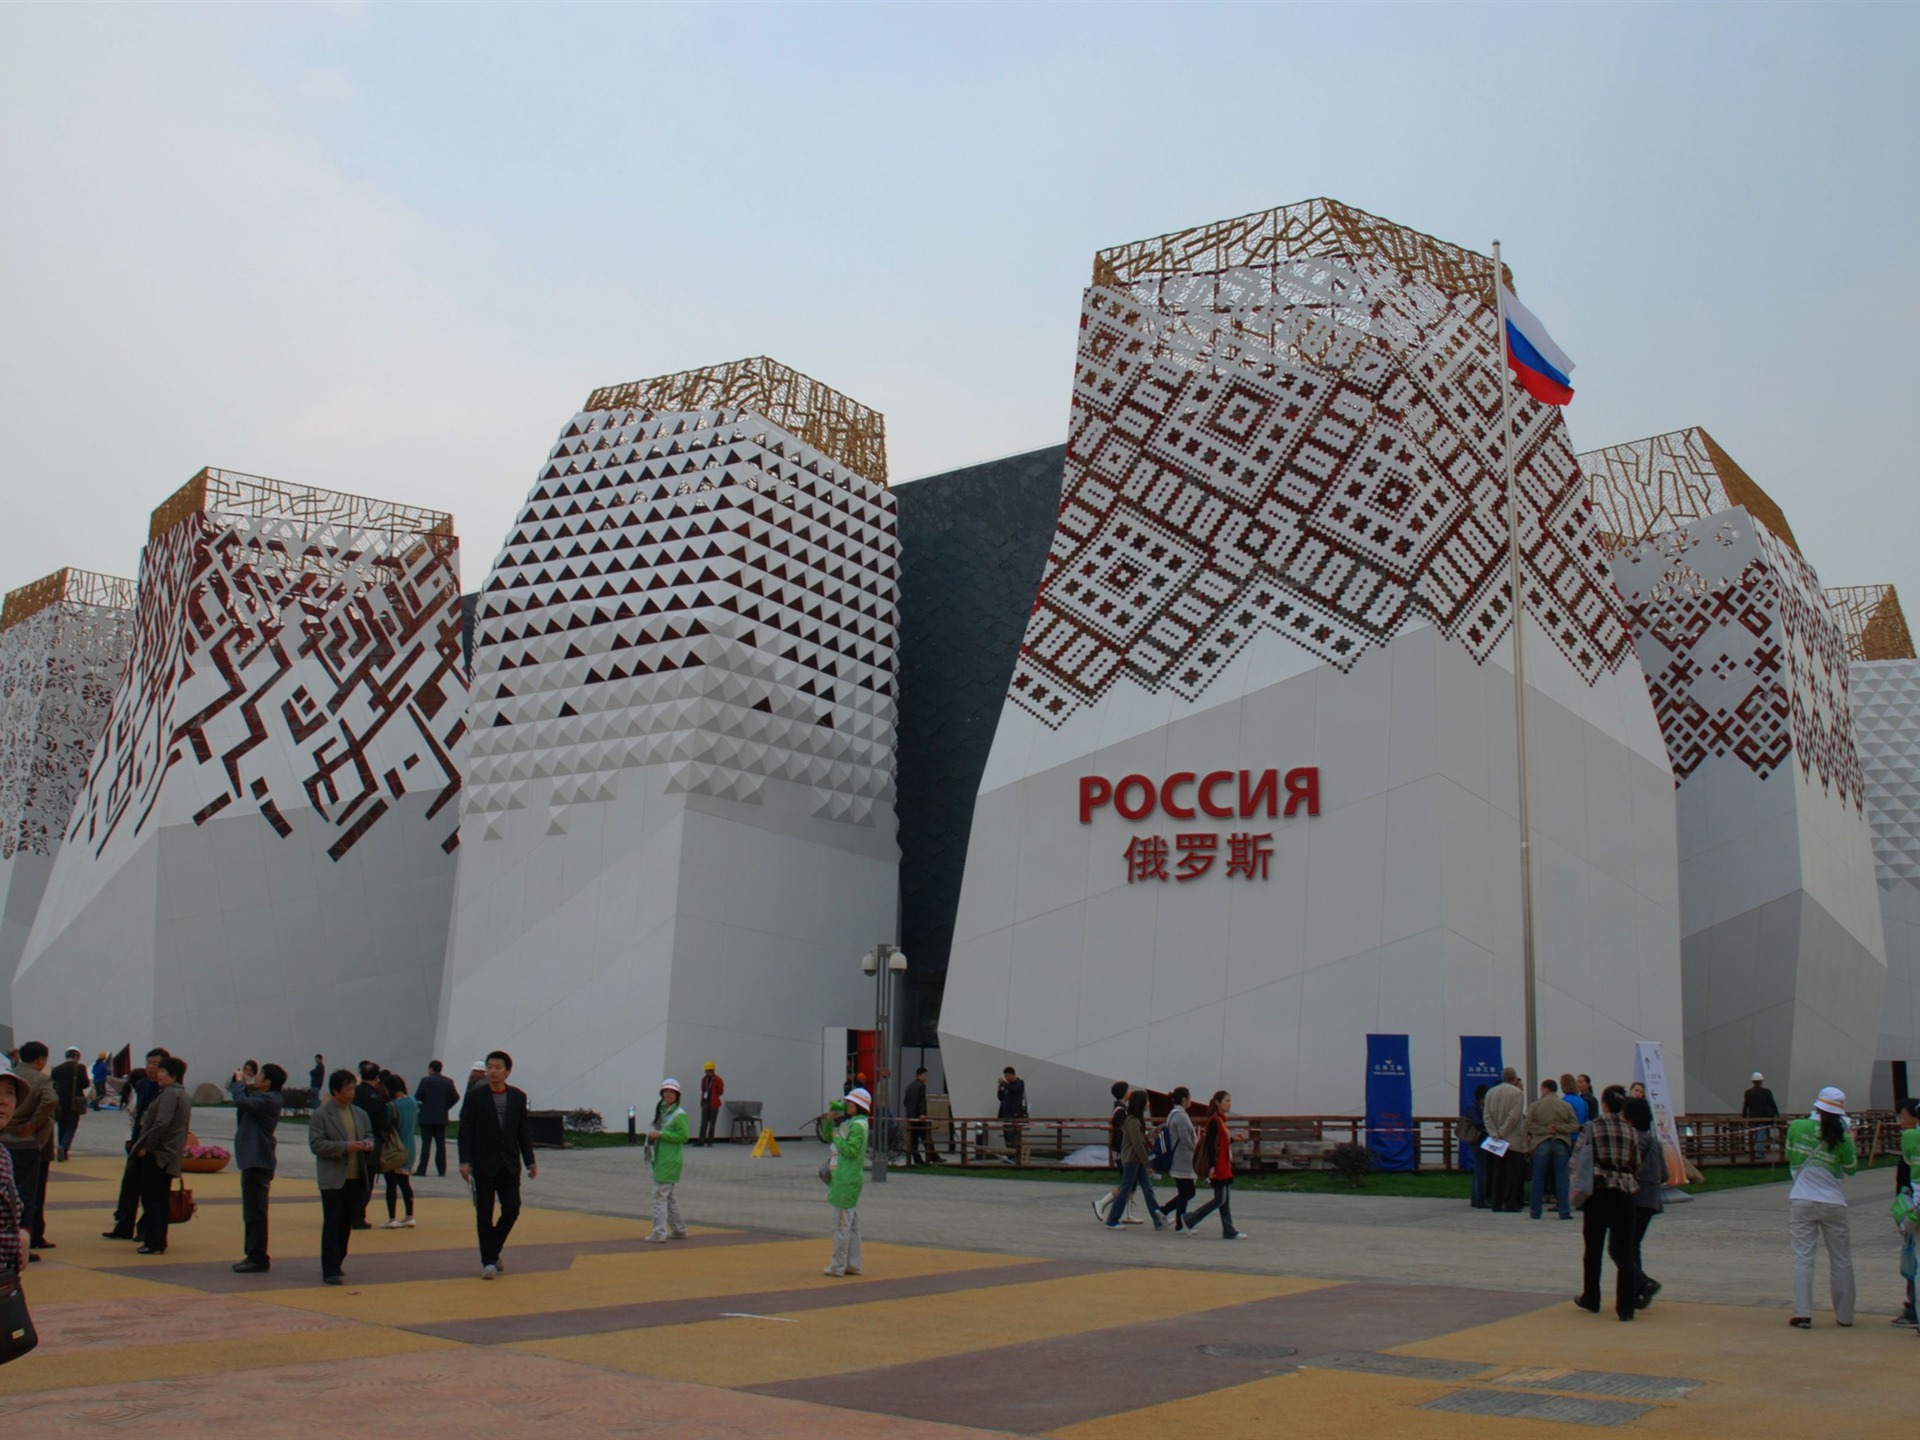 Commissioning of the 2010 Shanghai World Expo (studious works) #20 - 1920x1440